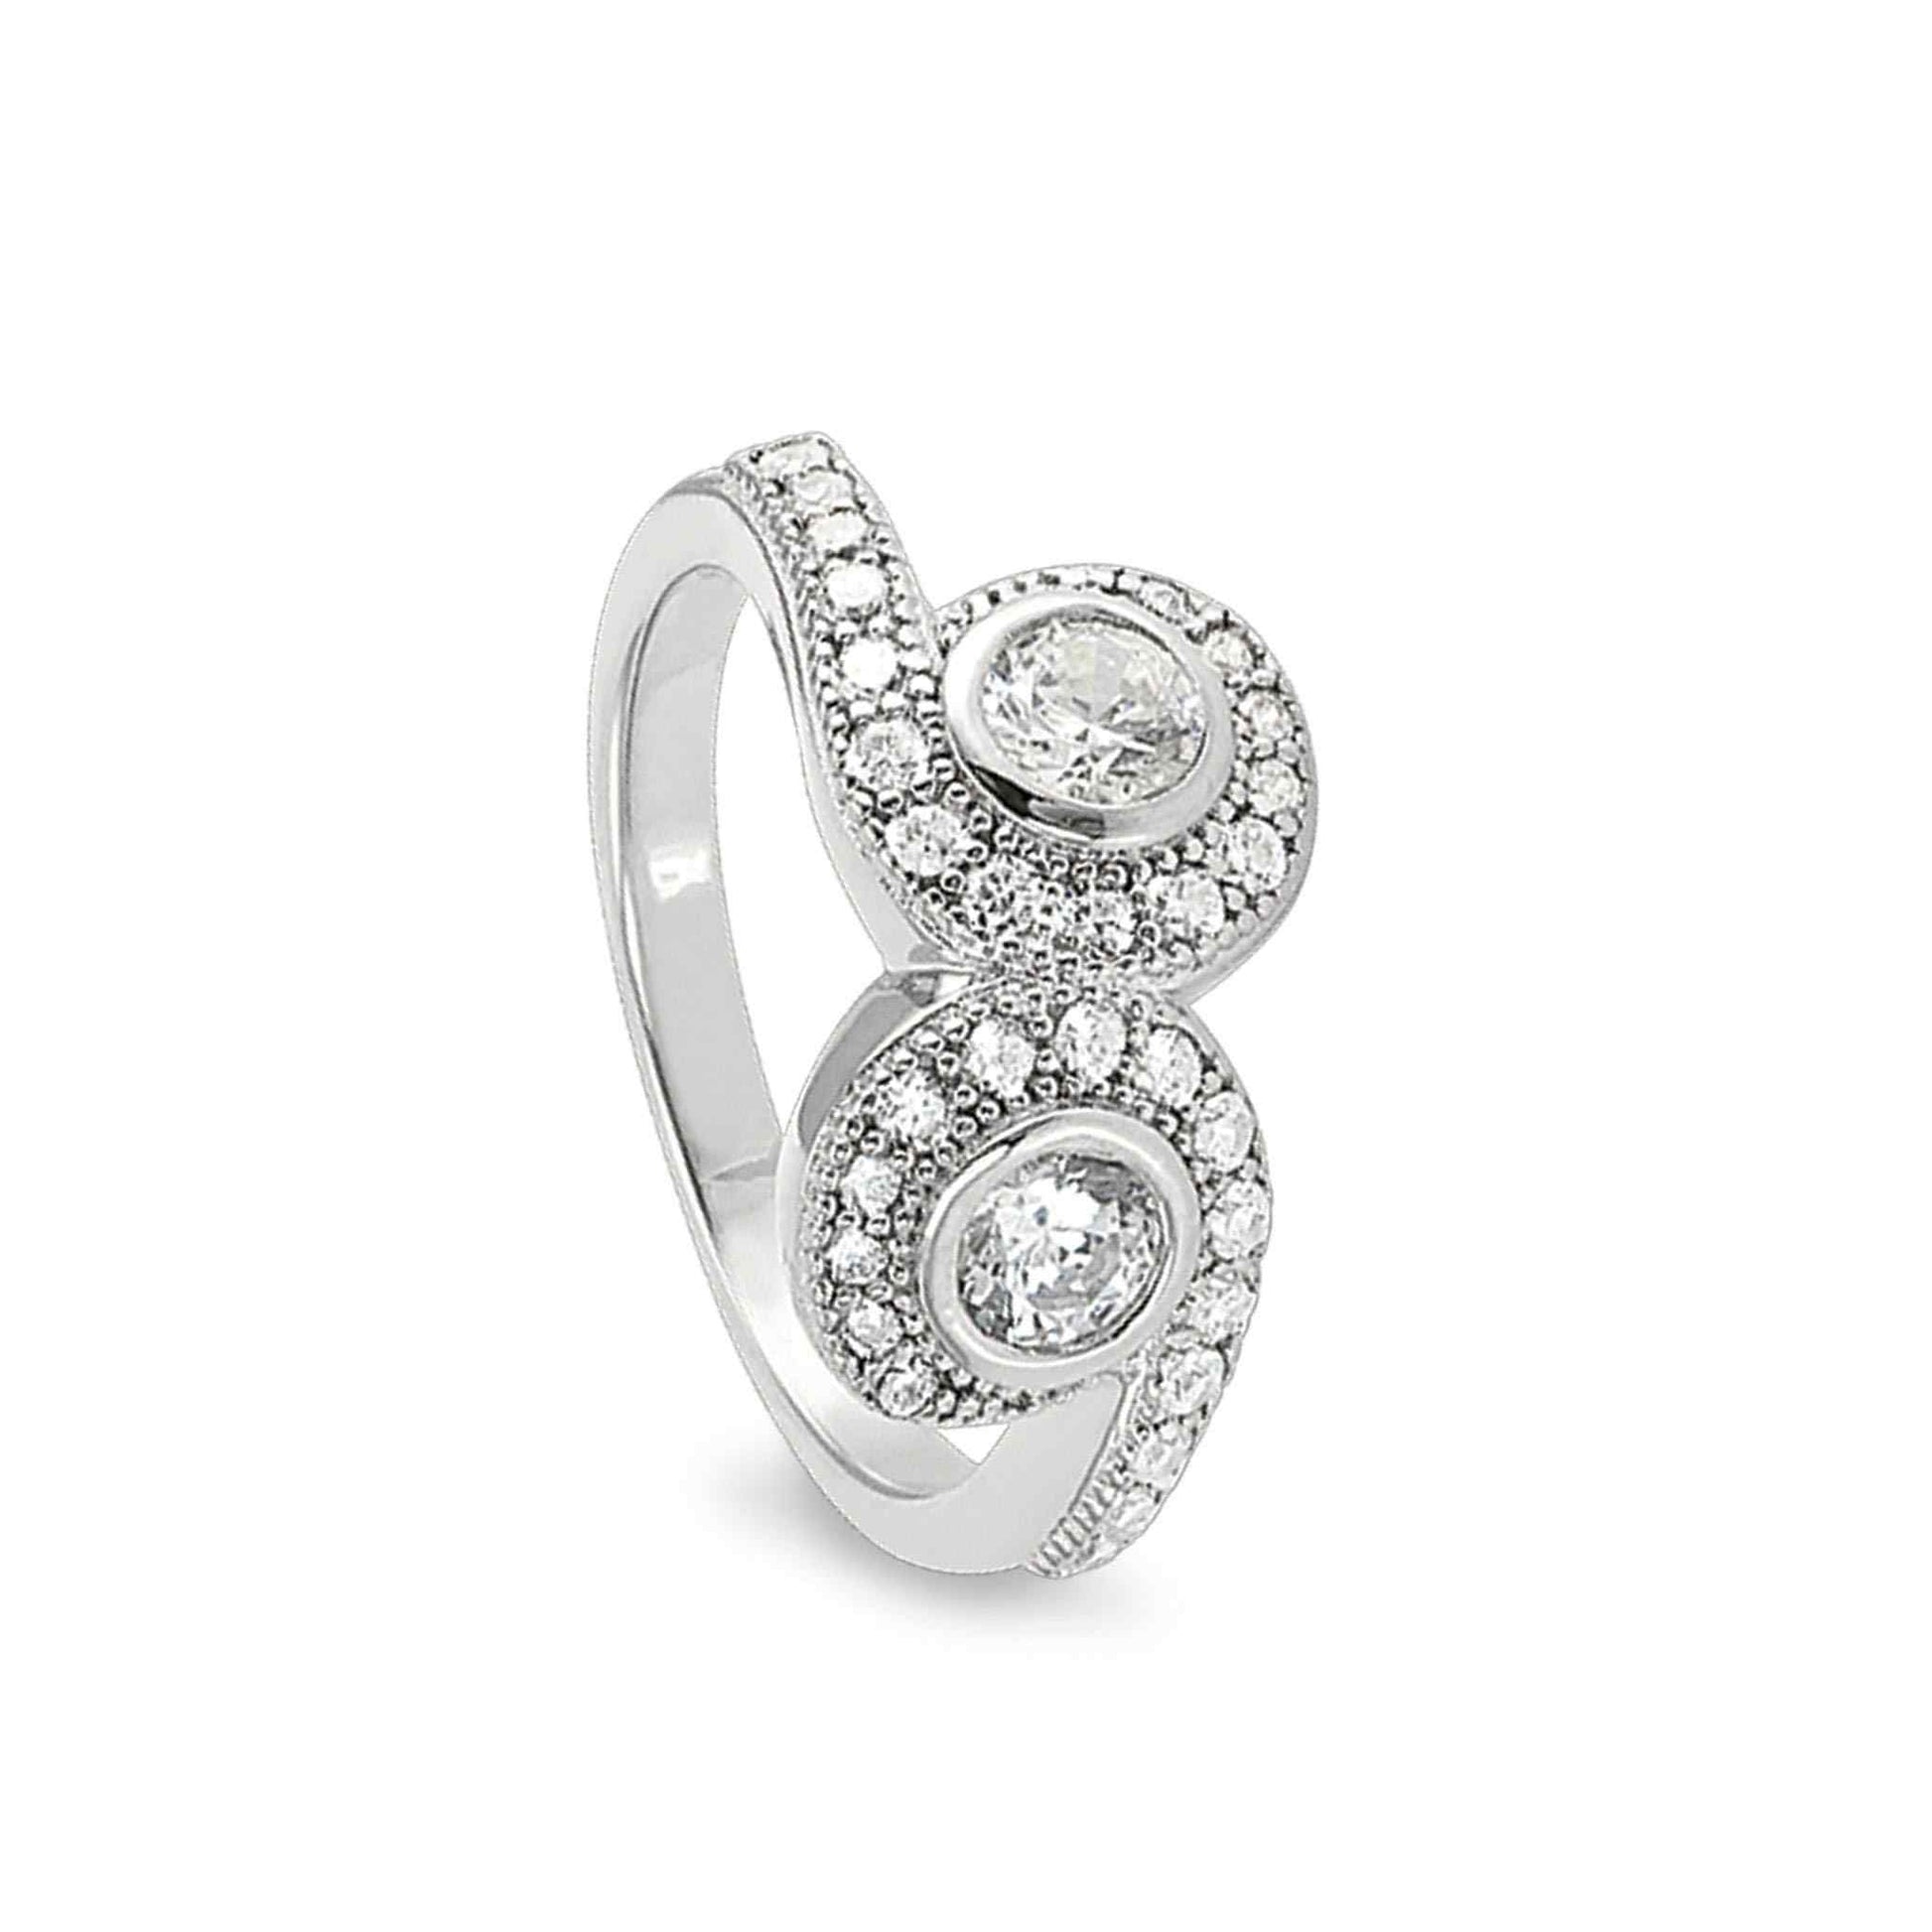 A swirl two stone ring with two 120 facet simulated diamonds displayed on a neutral white background.